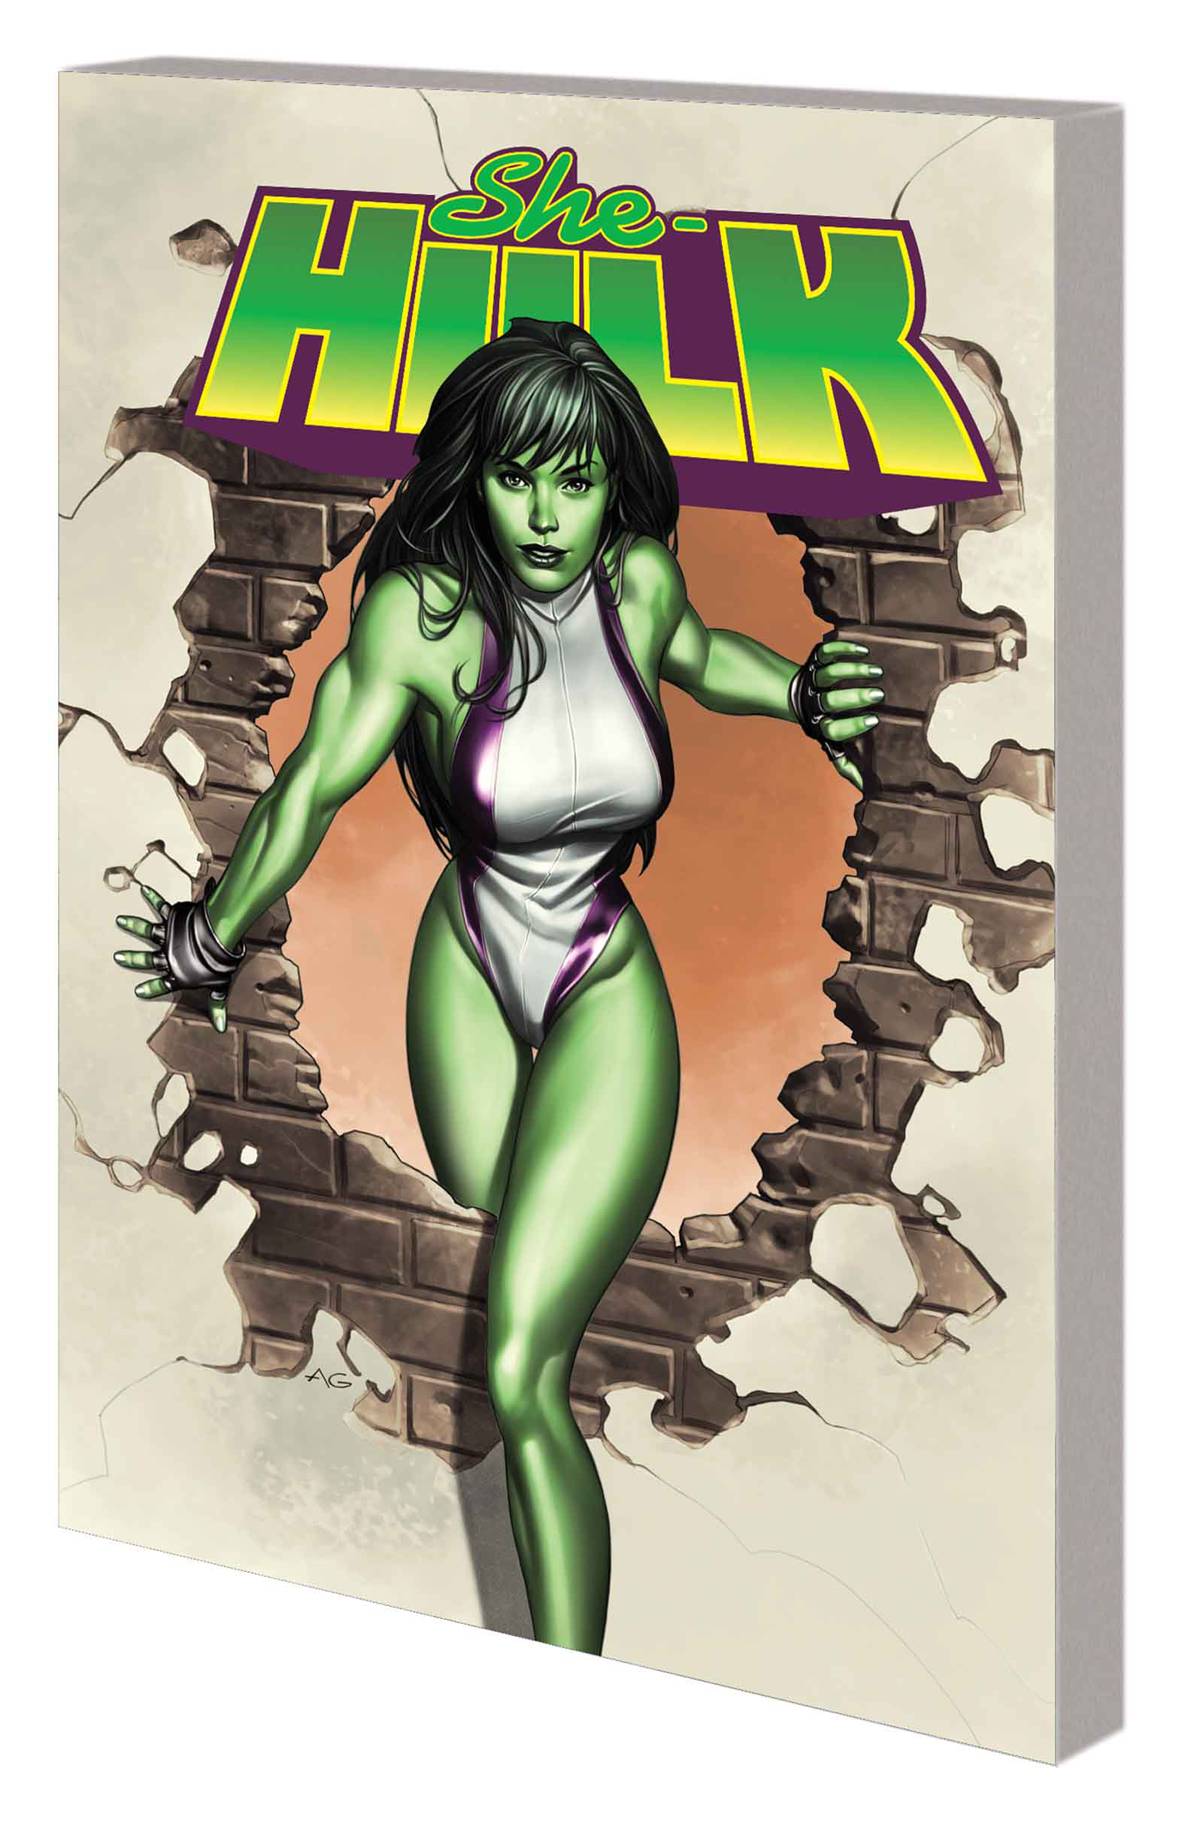 She-Hulk by Slott Graphic Novel Volume 1 Complete Collection